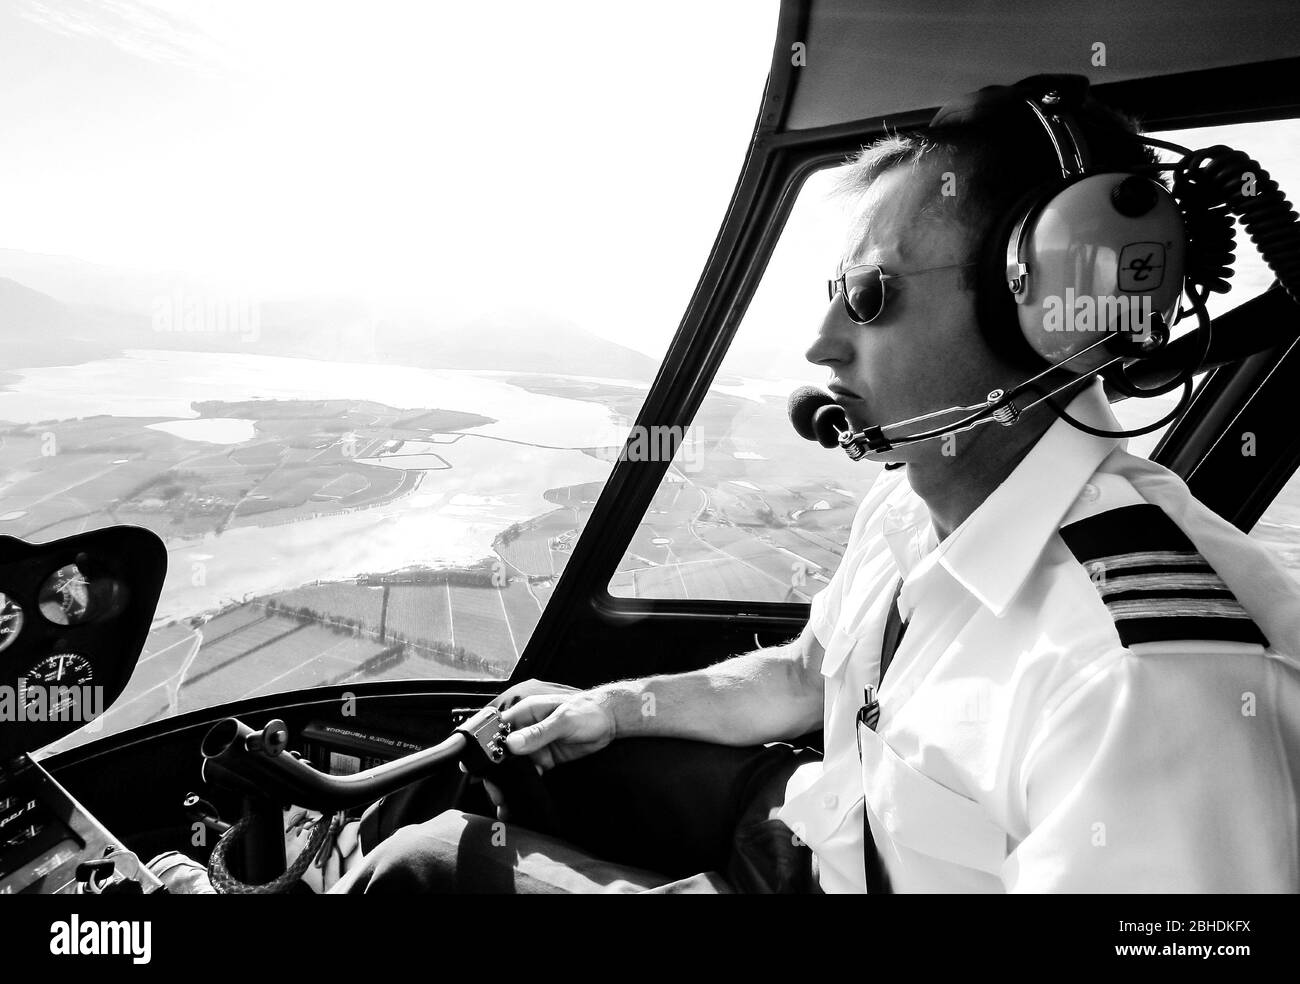 Hermanus, South Africa - July 20, 2009: Caucasian male helicopter pilot flying a R44 type chopper over rural area Stock Photo